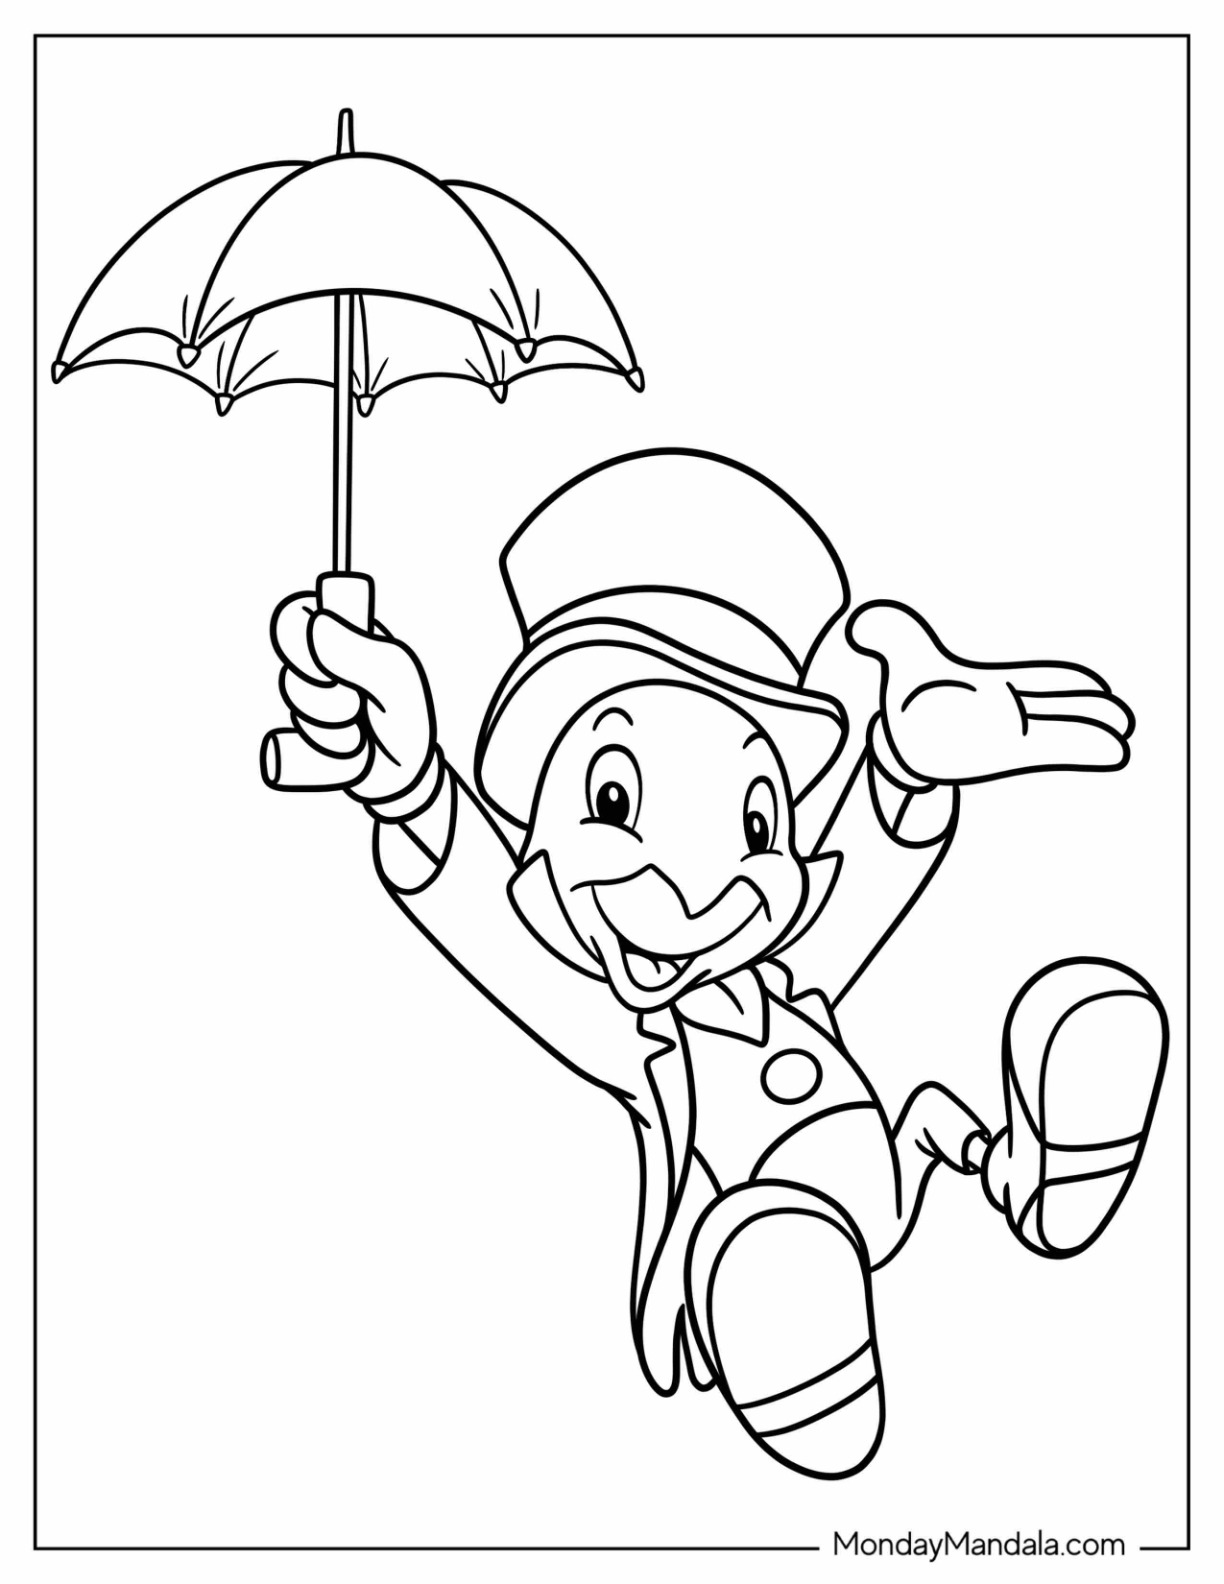 Pinocchio coloring pages free pdf printables